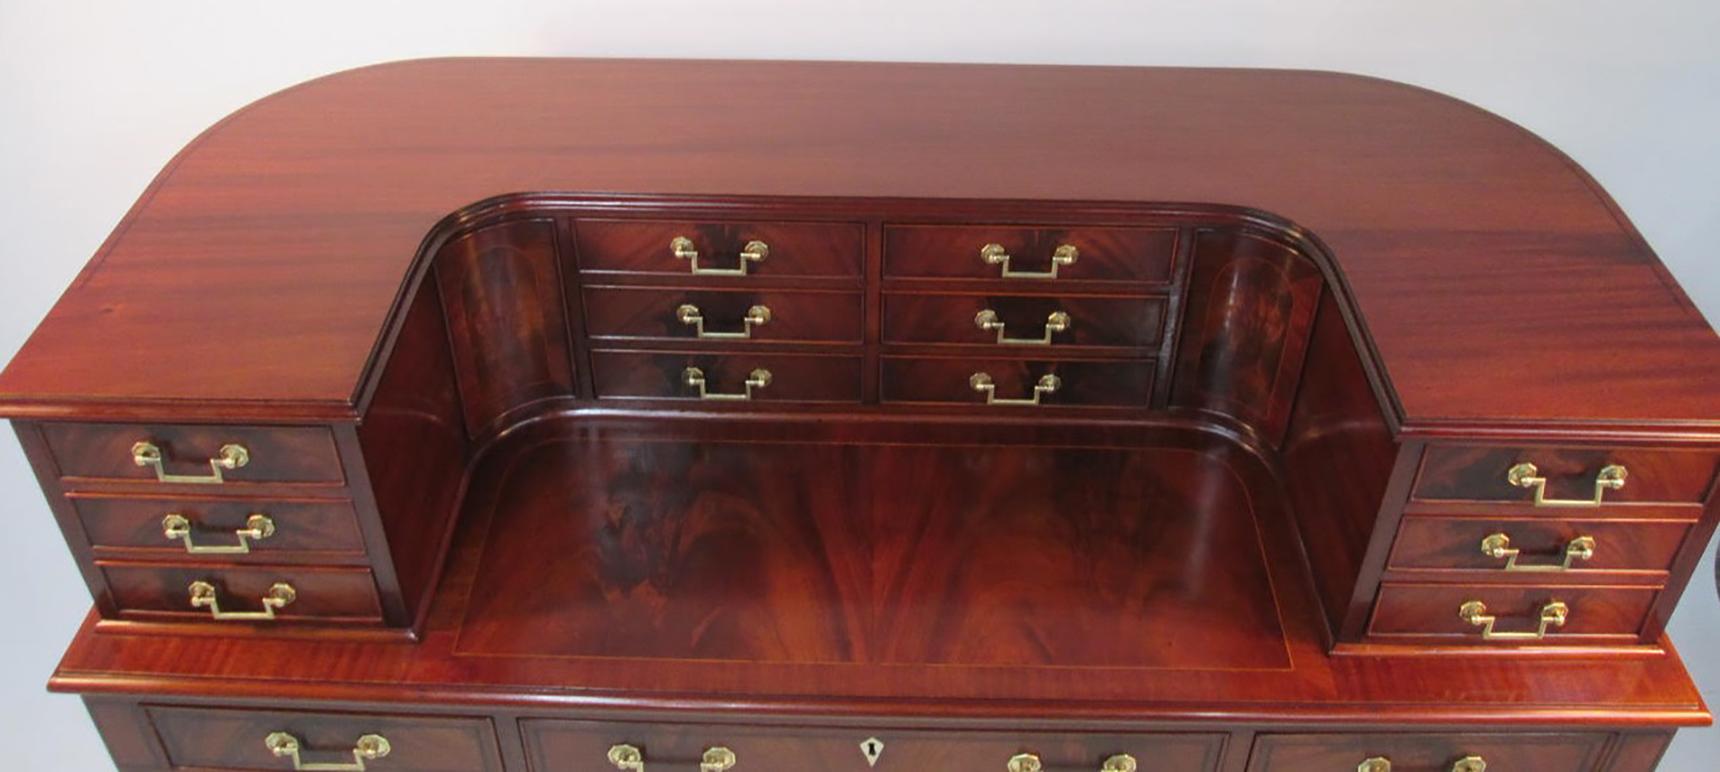 15 Drawer Mahogany Carlton House Desk with Solid Brass Pulls For Sale 1